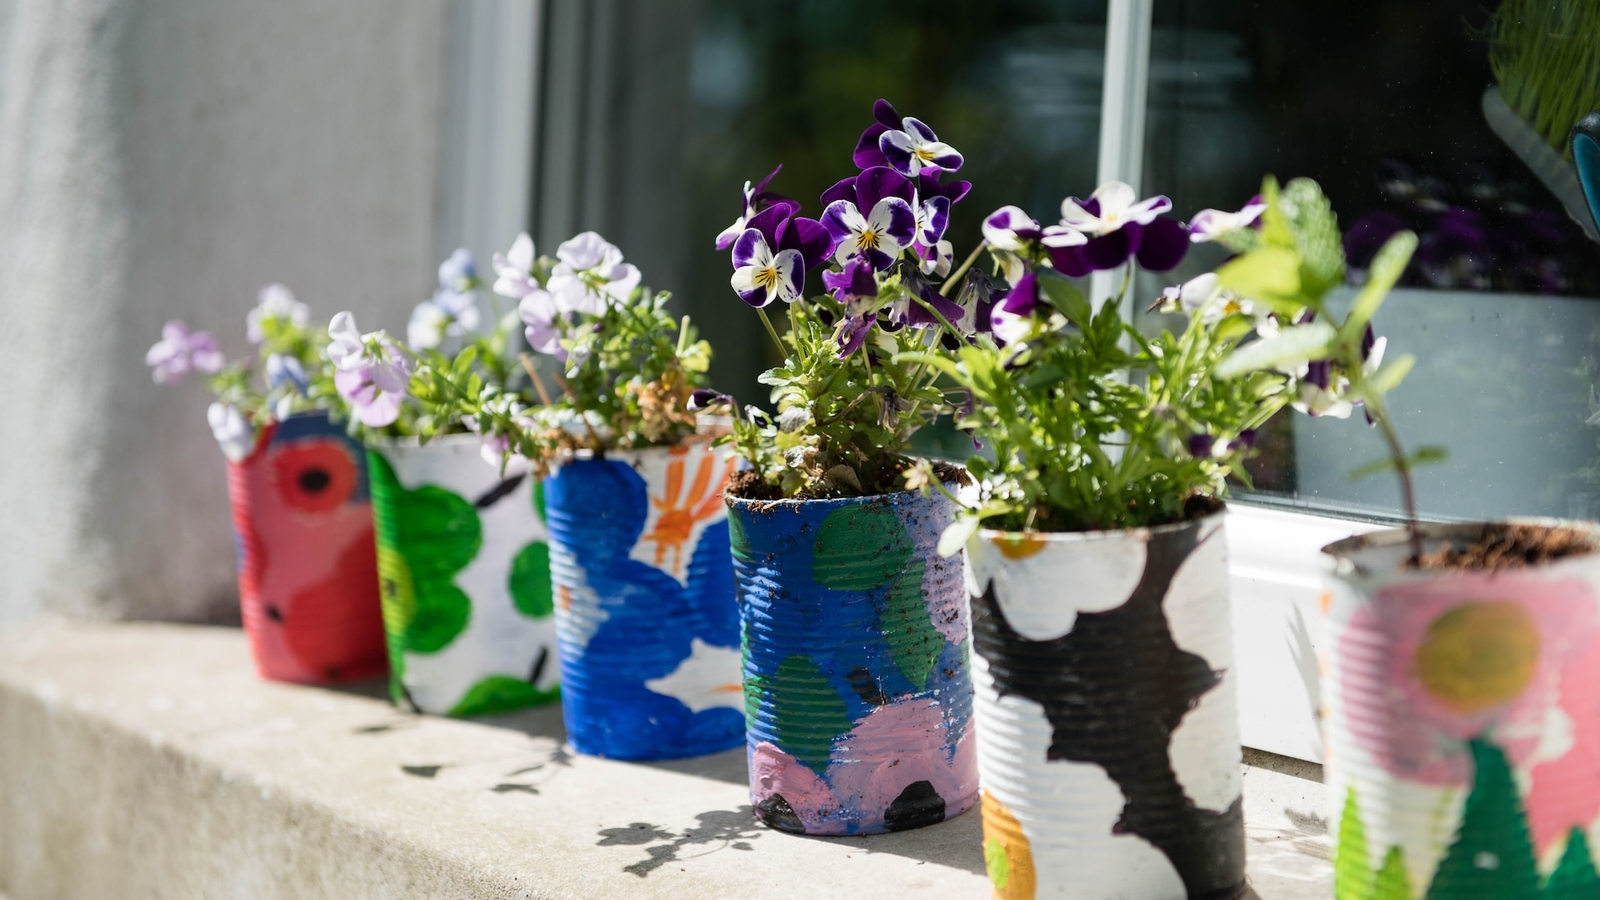 Plant pots made using tin cans on a windowsill with plants growing in them